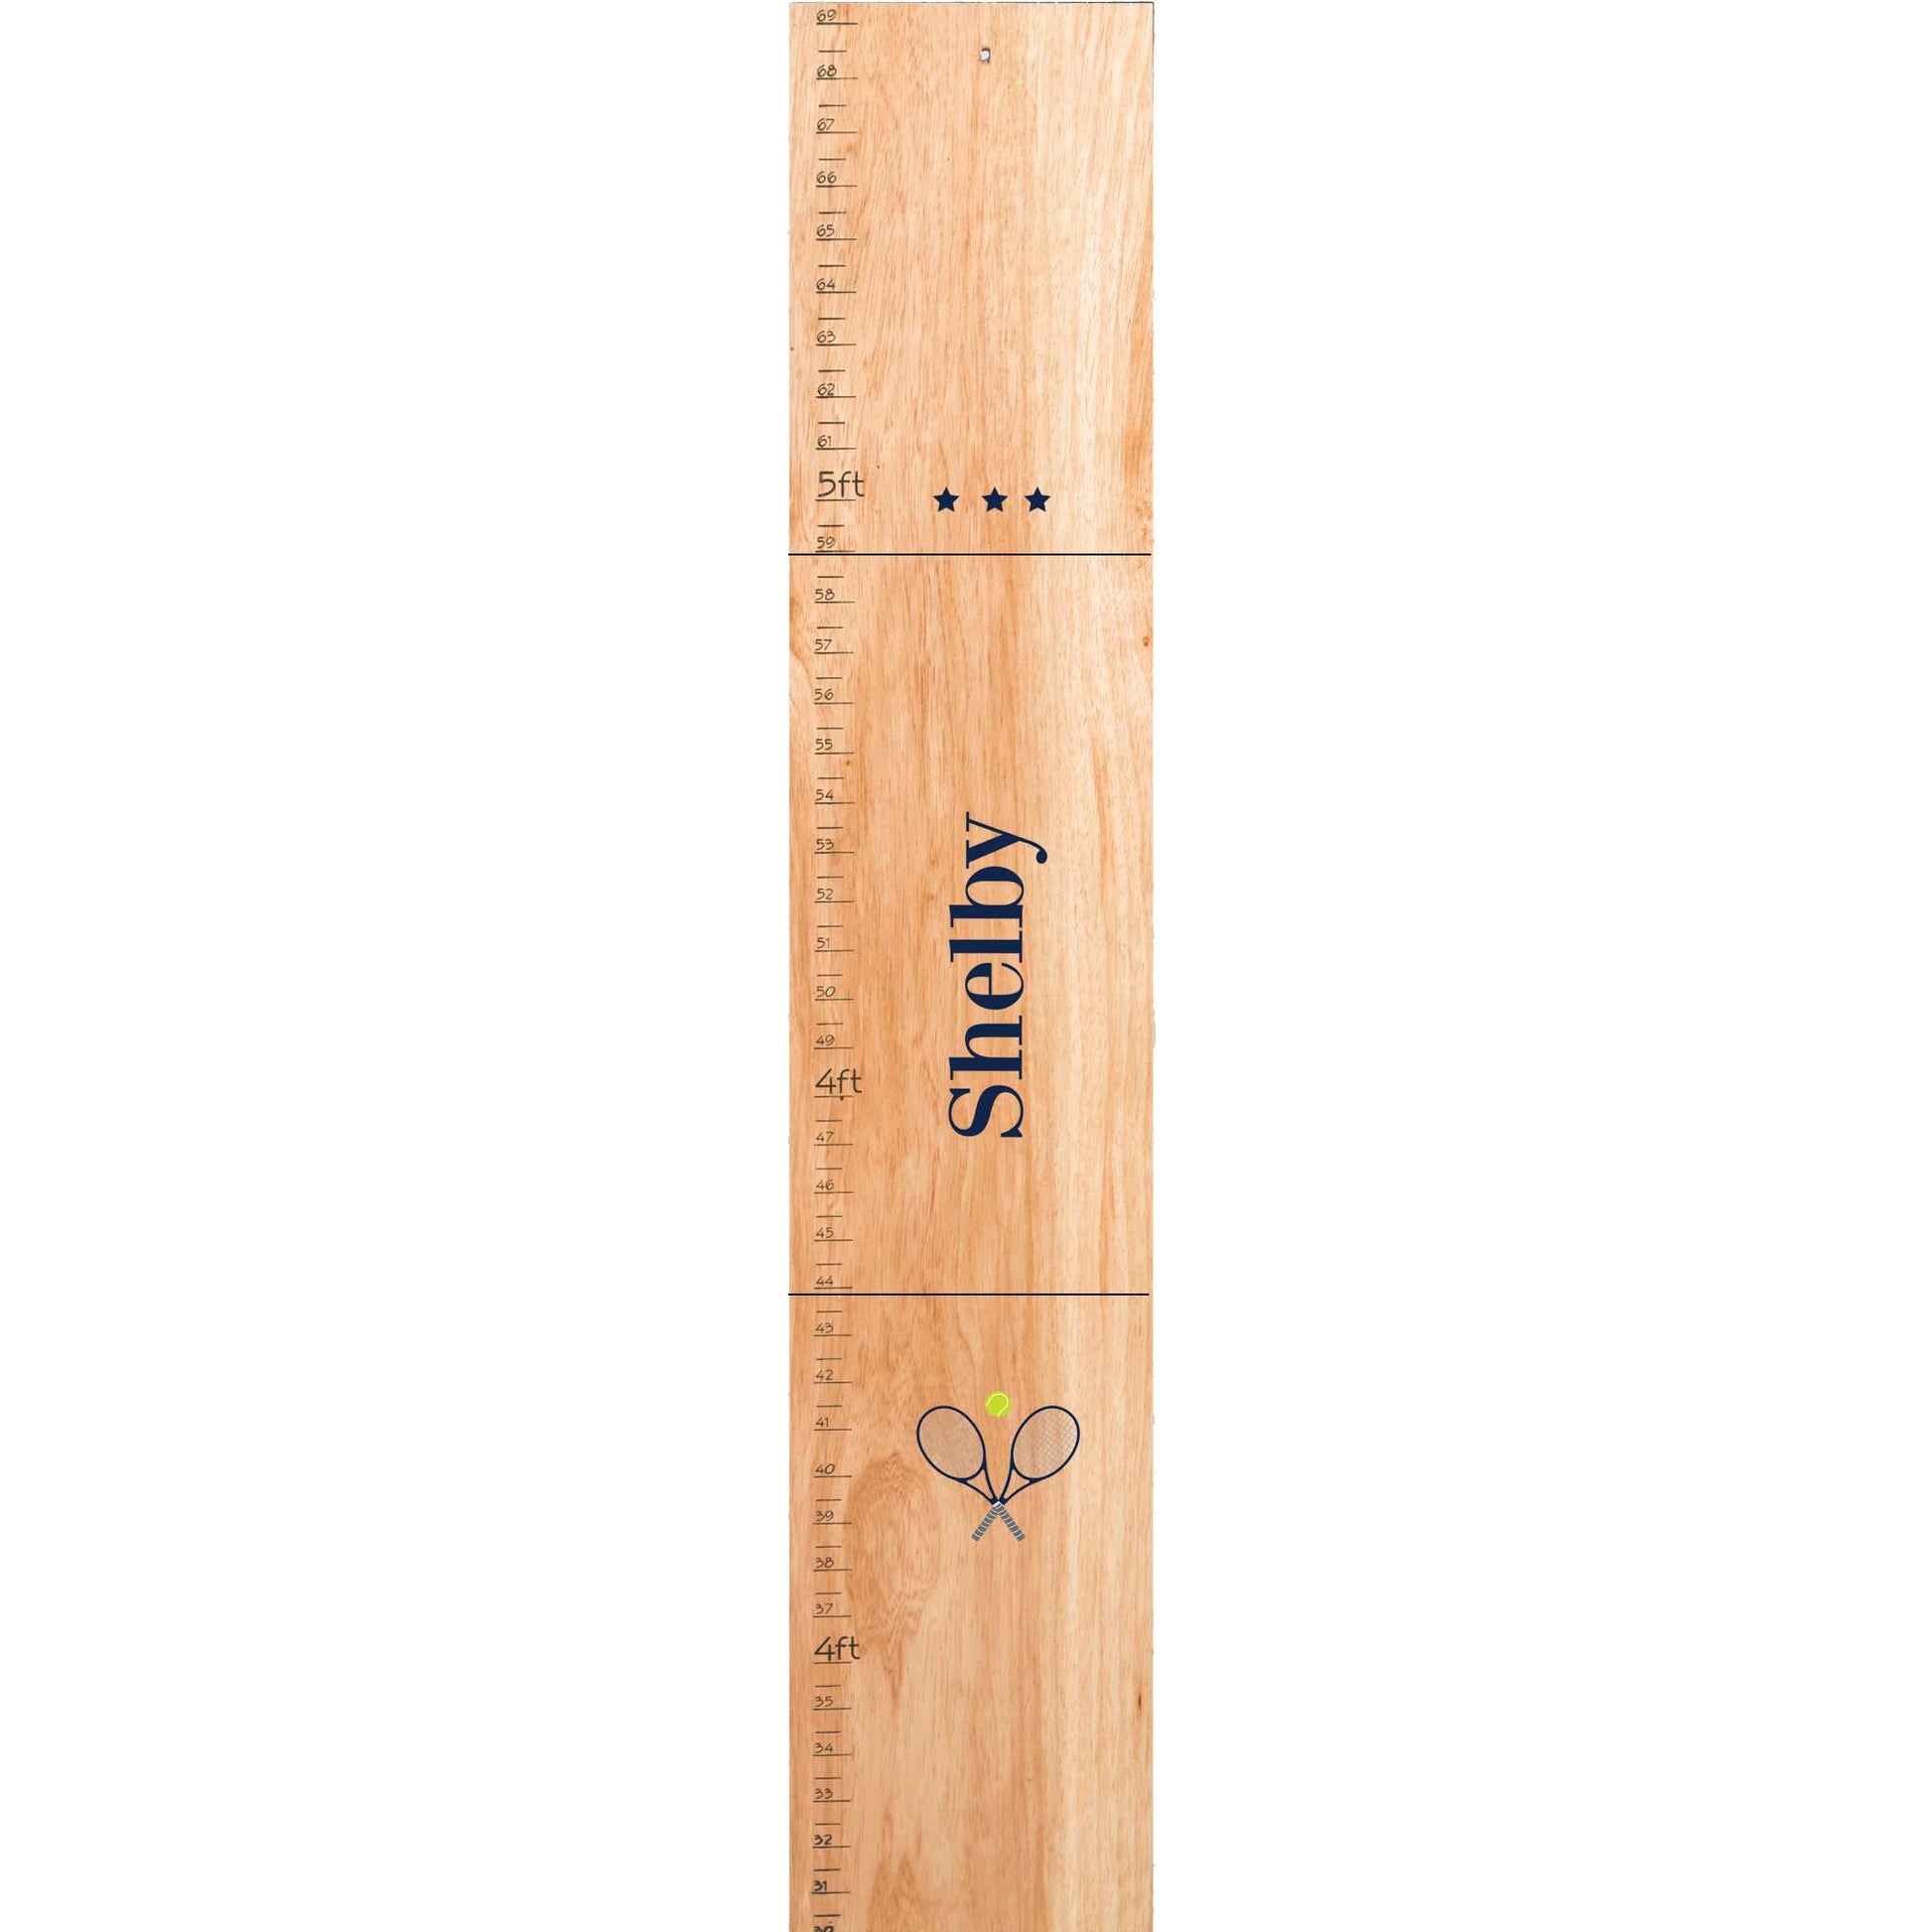 Personalized Natural Growth Chart With Lacrosse Design